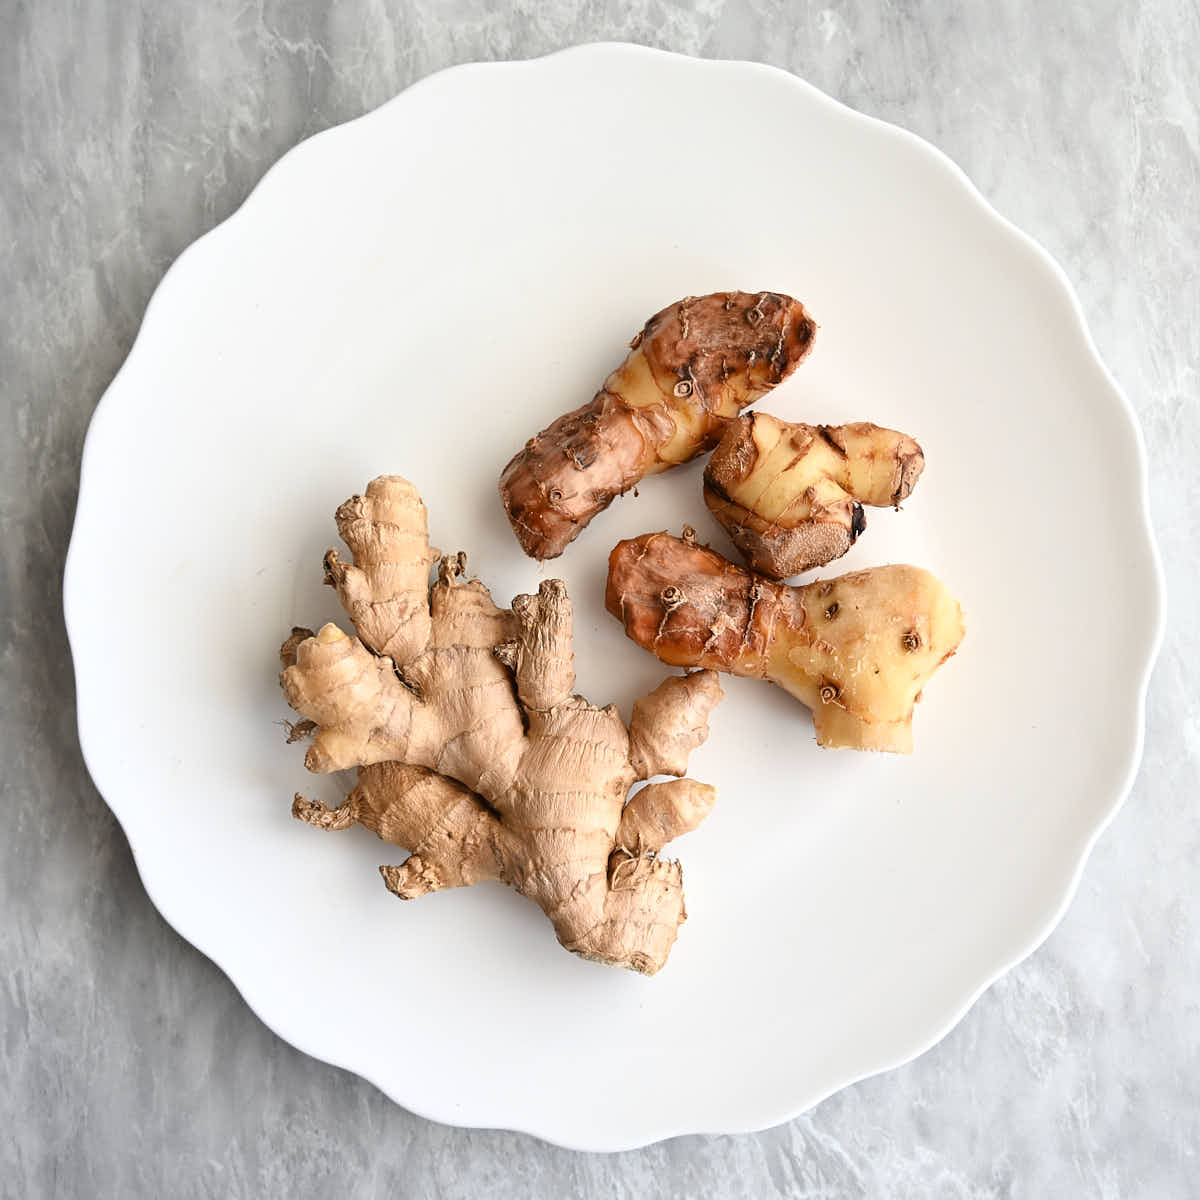 Galangal and ginger root side by side on a white plate.